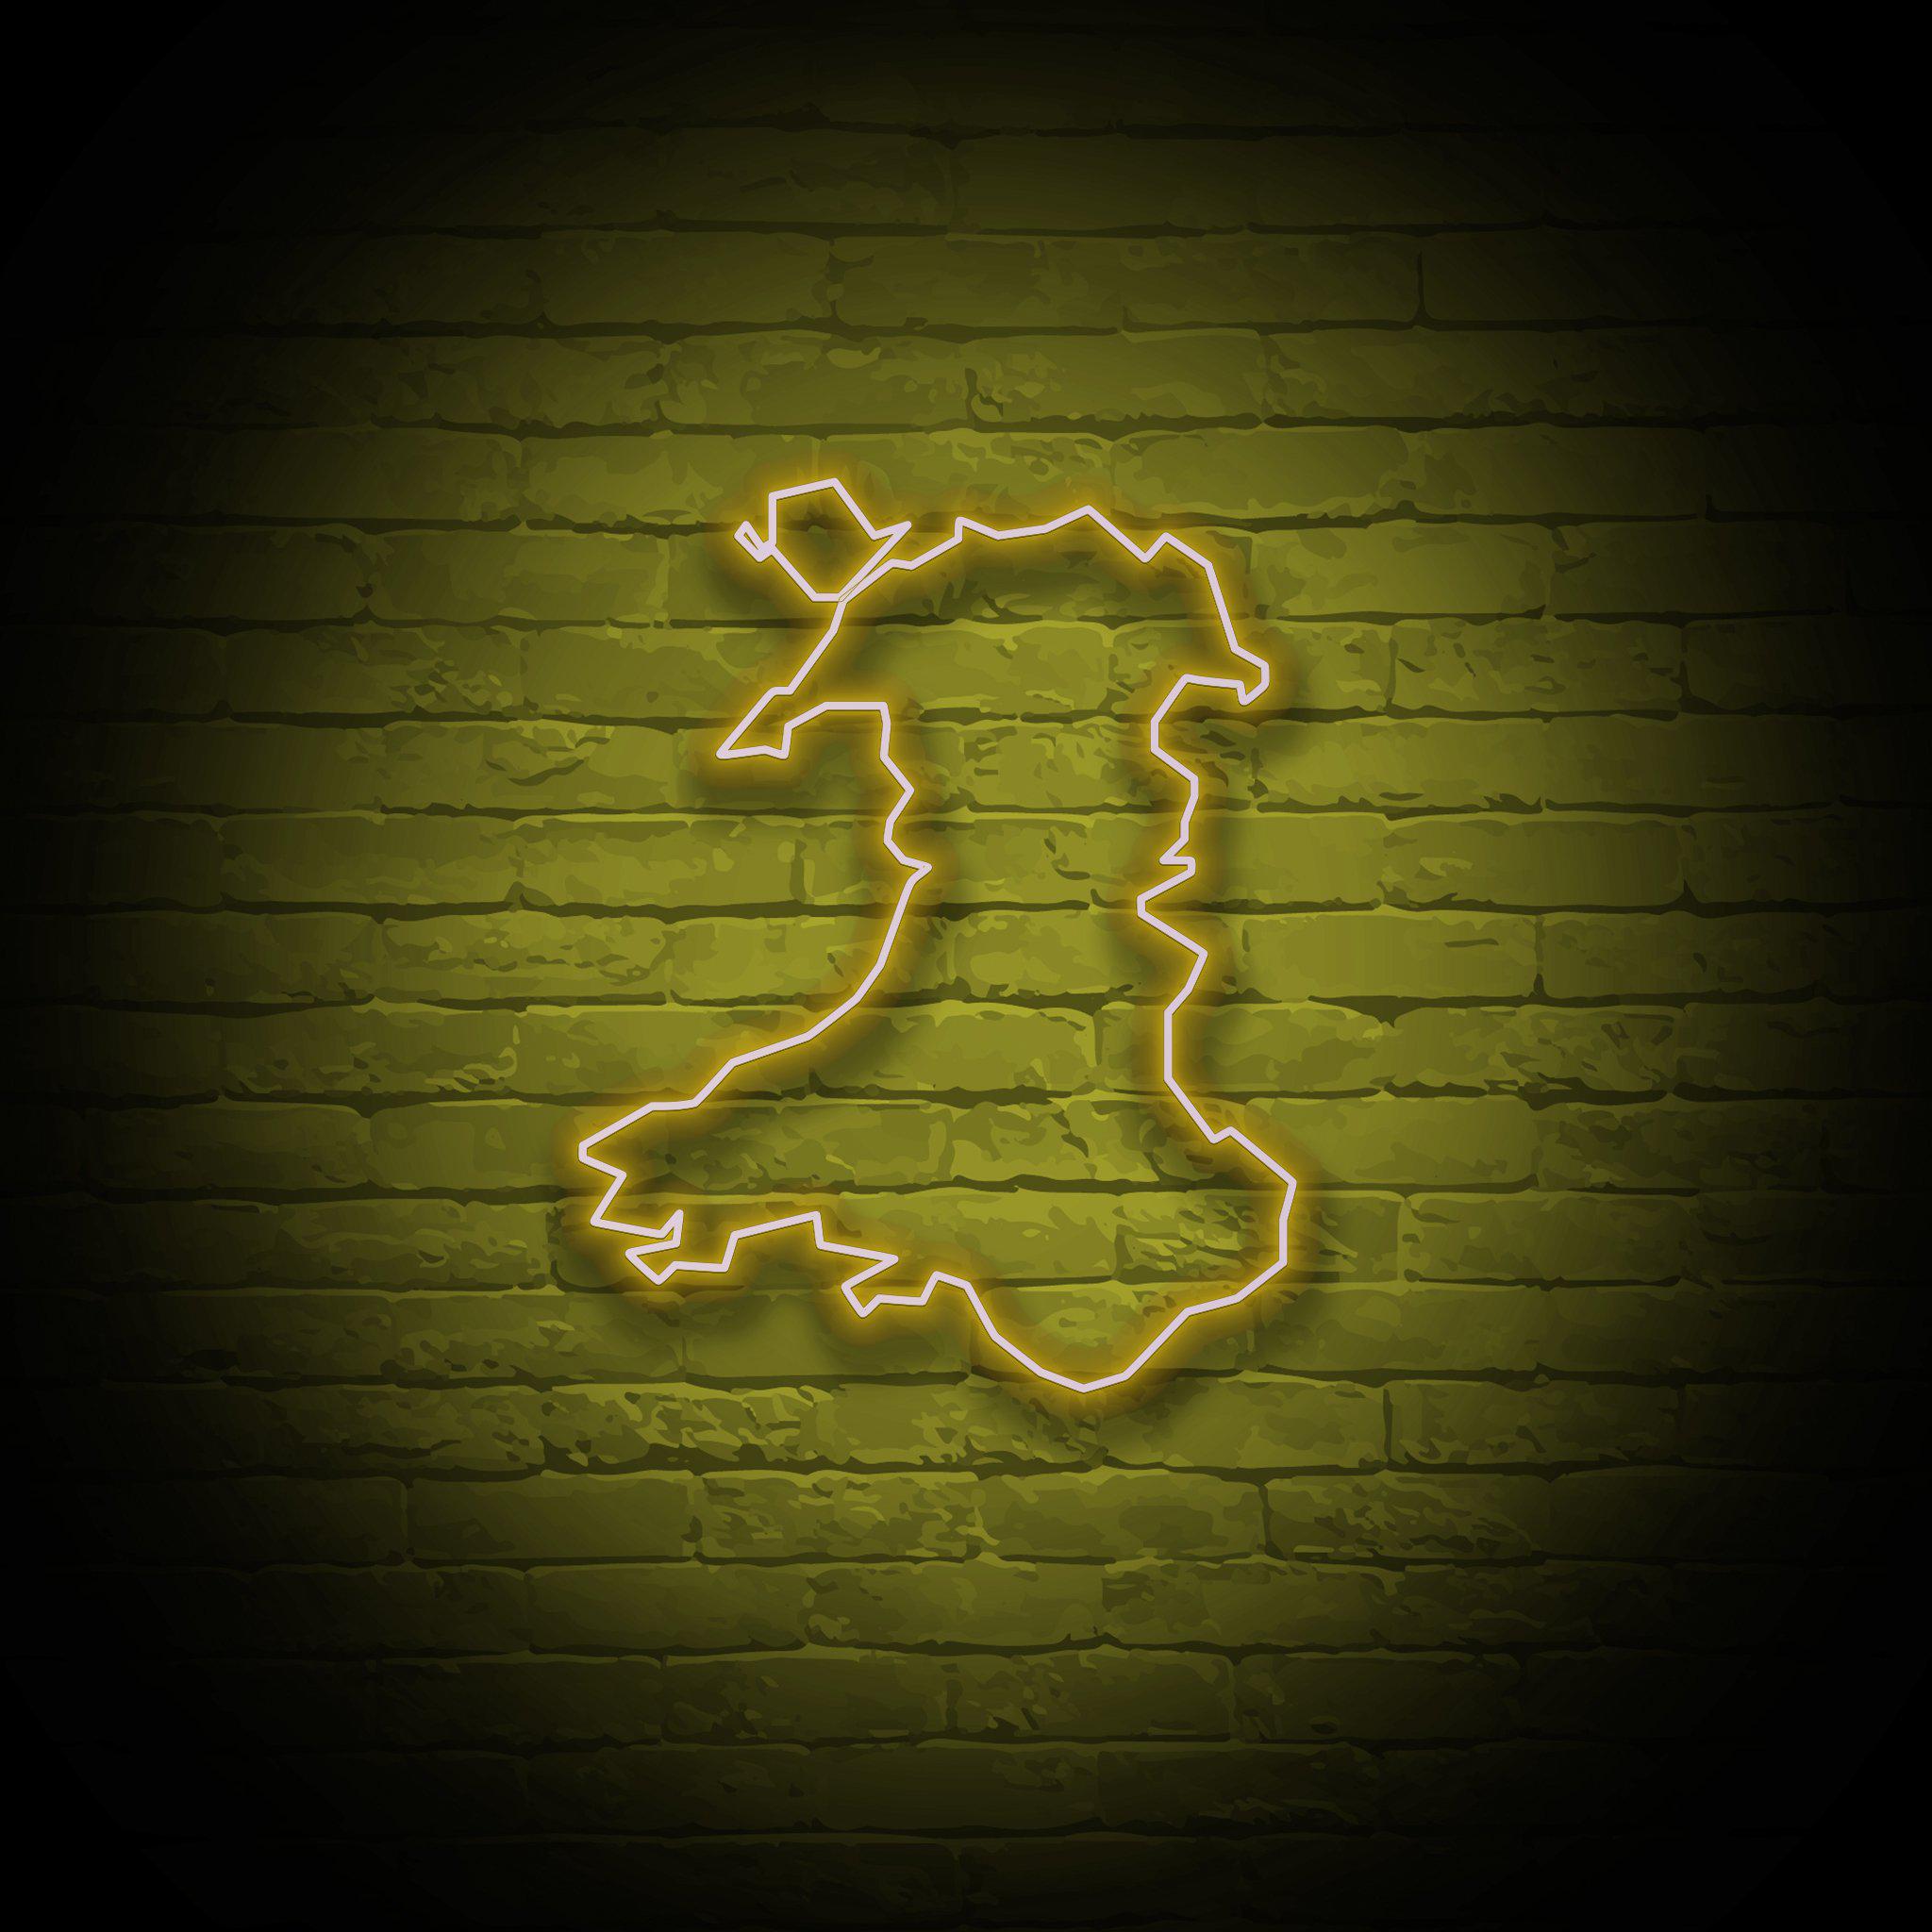 'WALES' NEON SIGN